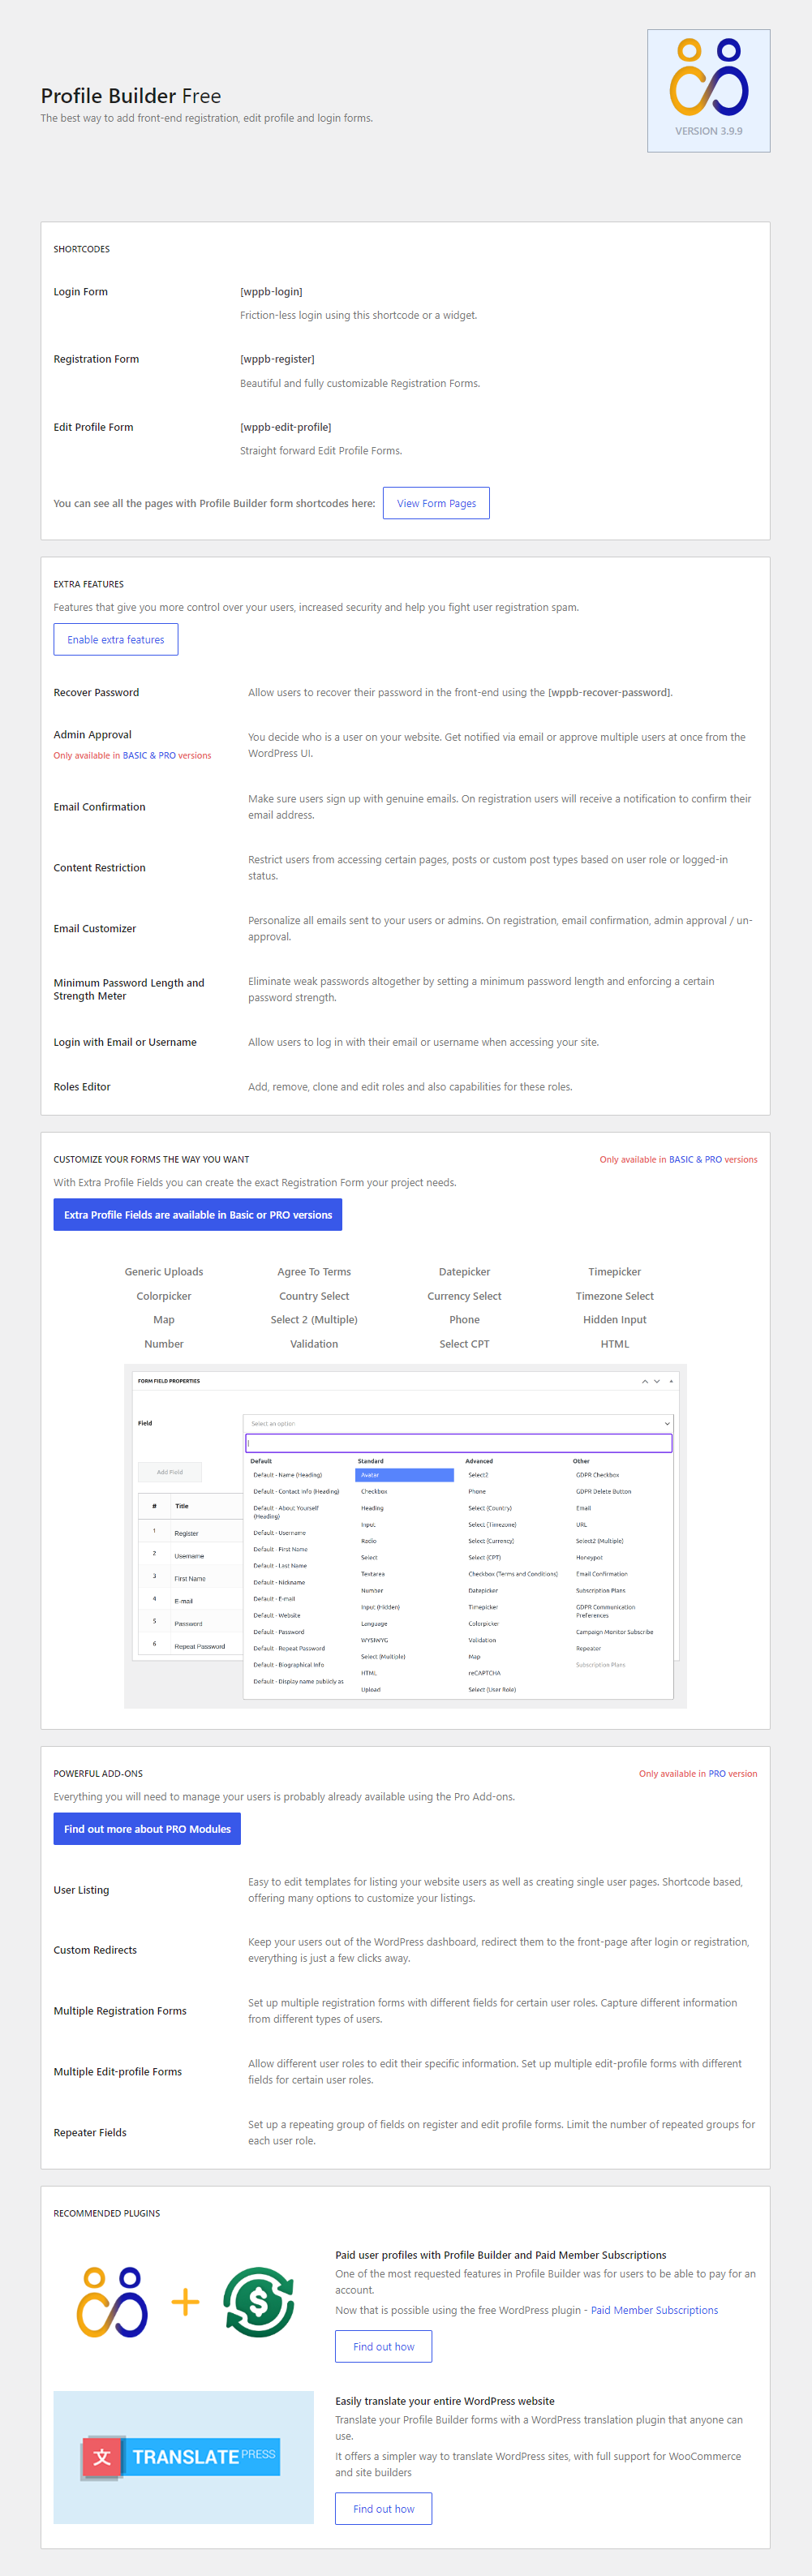 User Roles Editor - create custom user roles or edit existing roles and capabilities